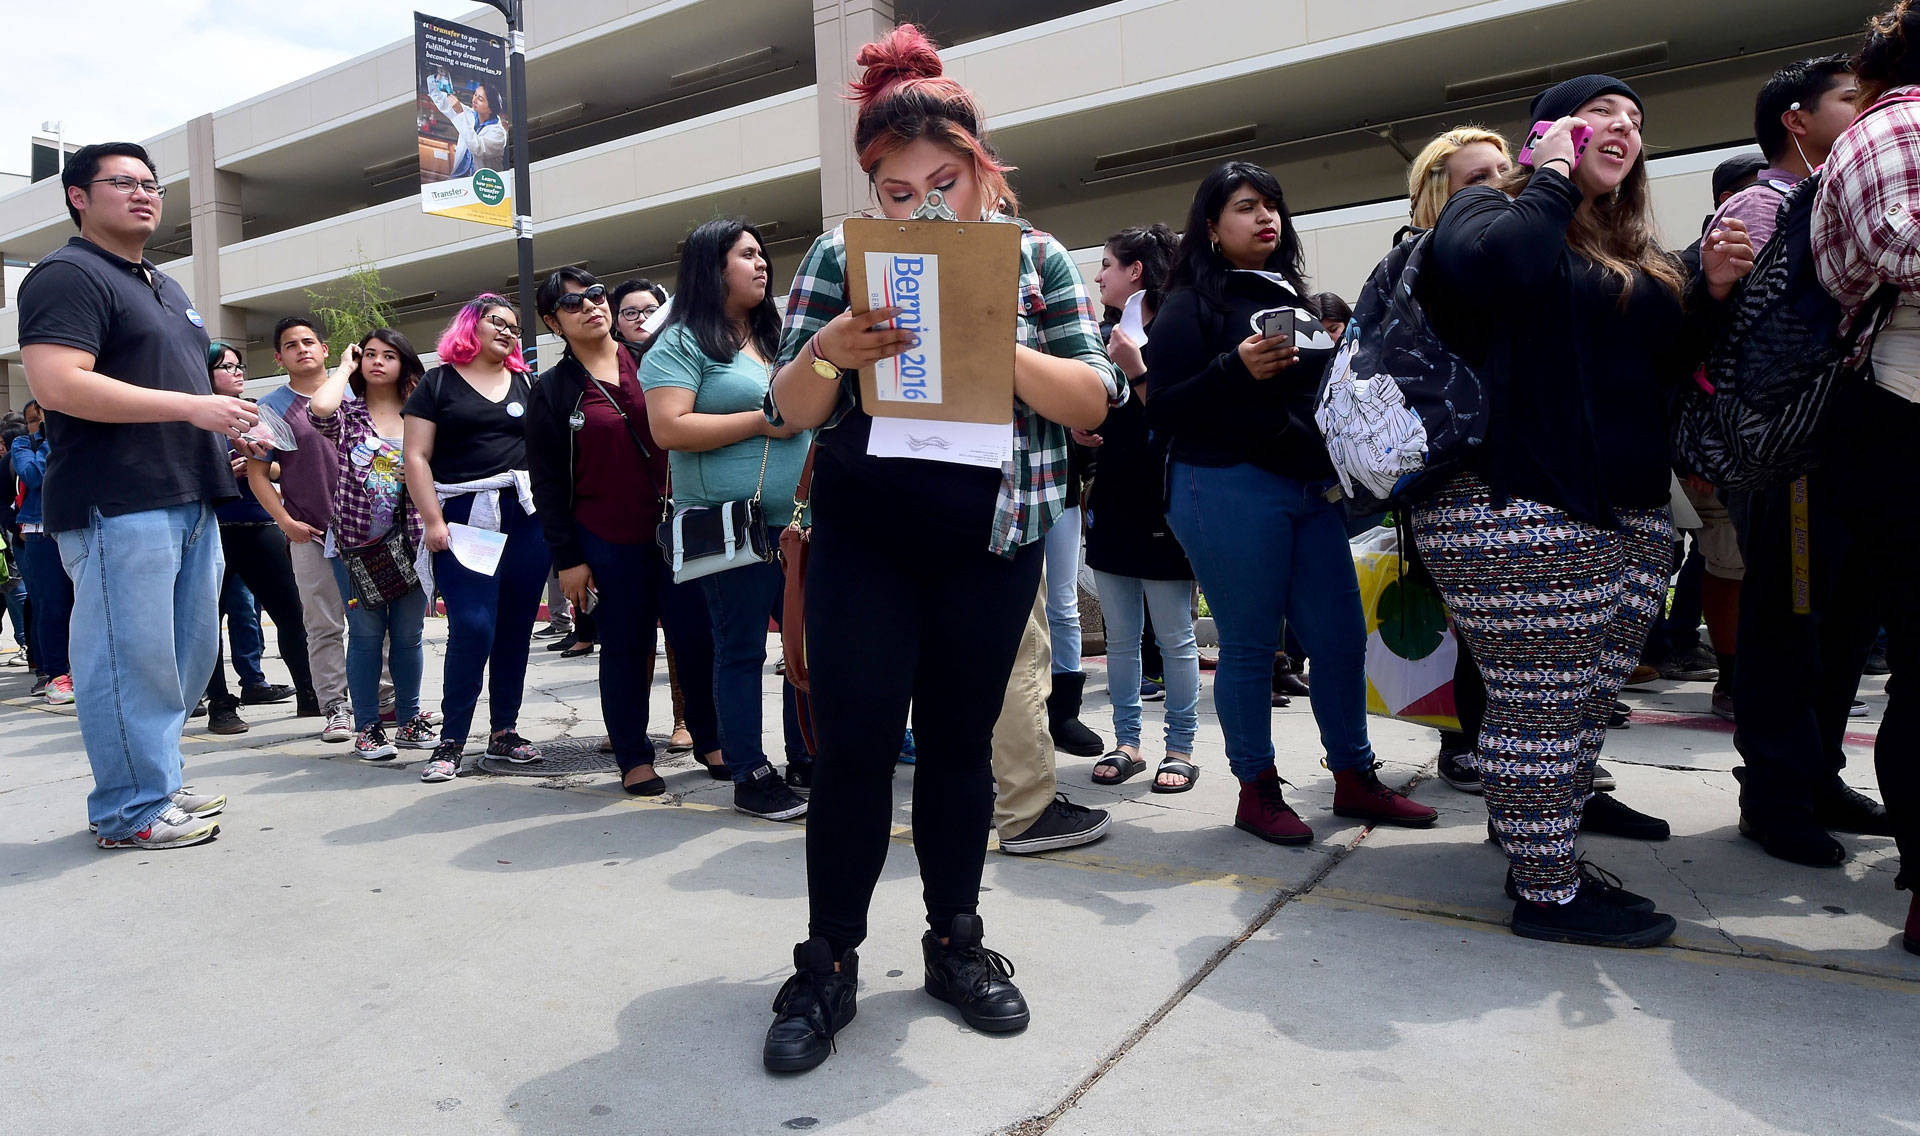 Wendy Hic fills out her voter registration form as students wait in line for their forms at an East Los Angeles College 'Rock the Campus for Bernie' event in Monterey Park on May 10, 2016.  Frederic J. Brown/AFP/Getty Images